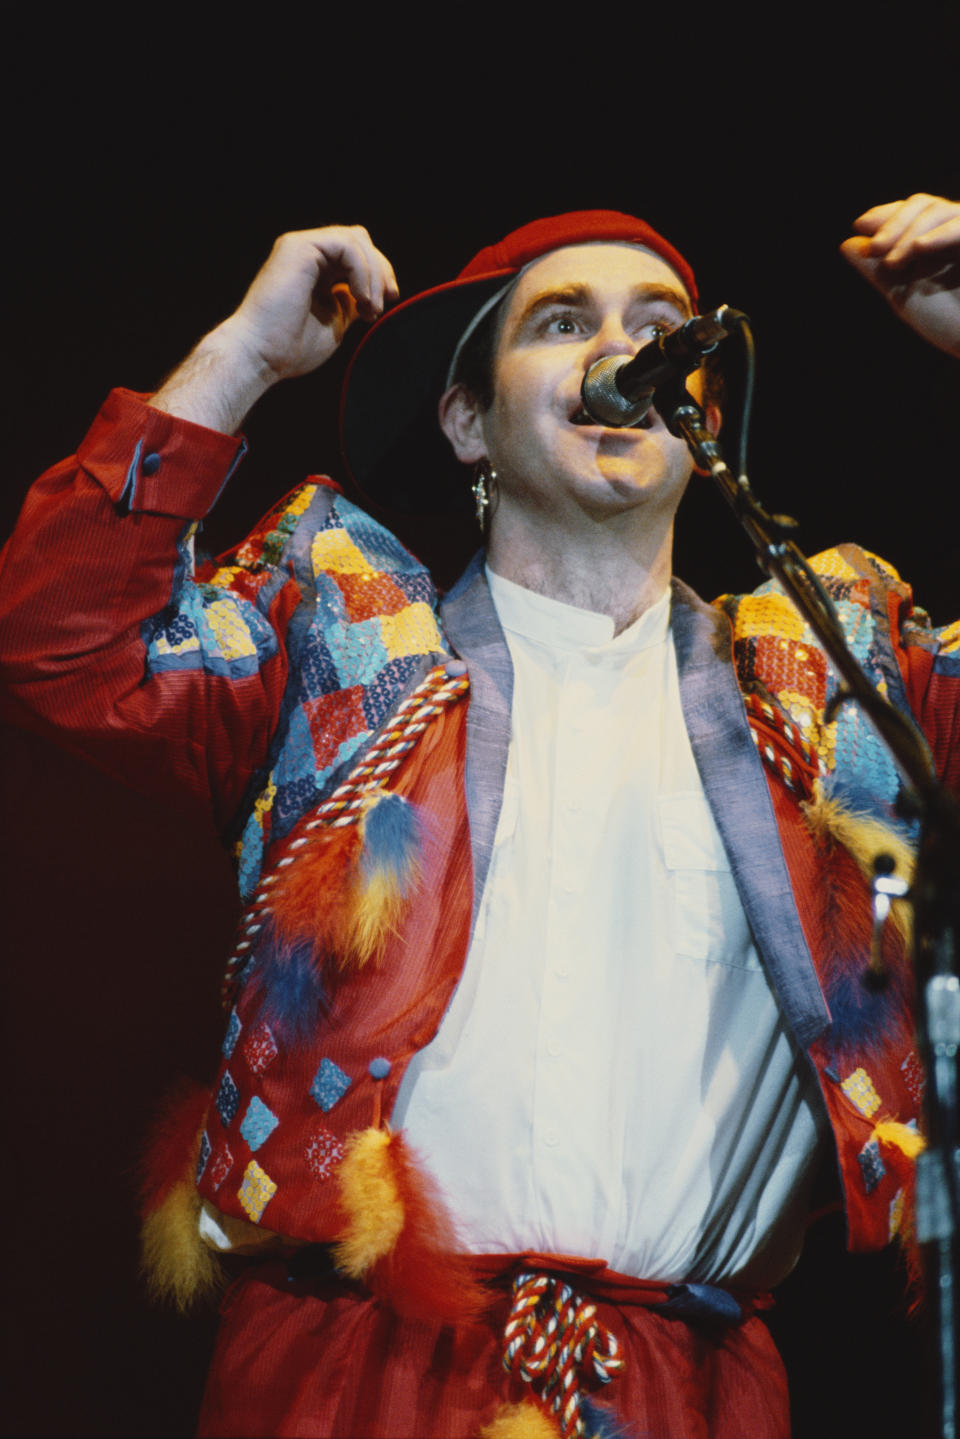 The performer in concert at the Hammersmith Odeon in London, December 1982.